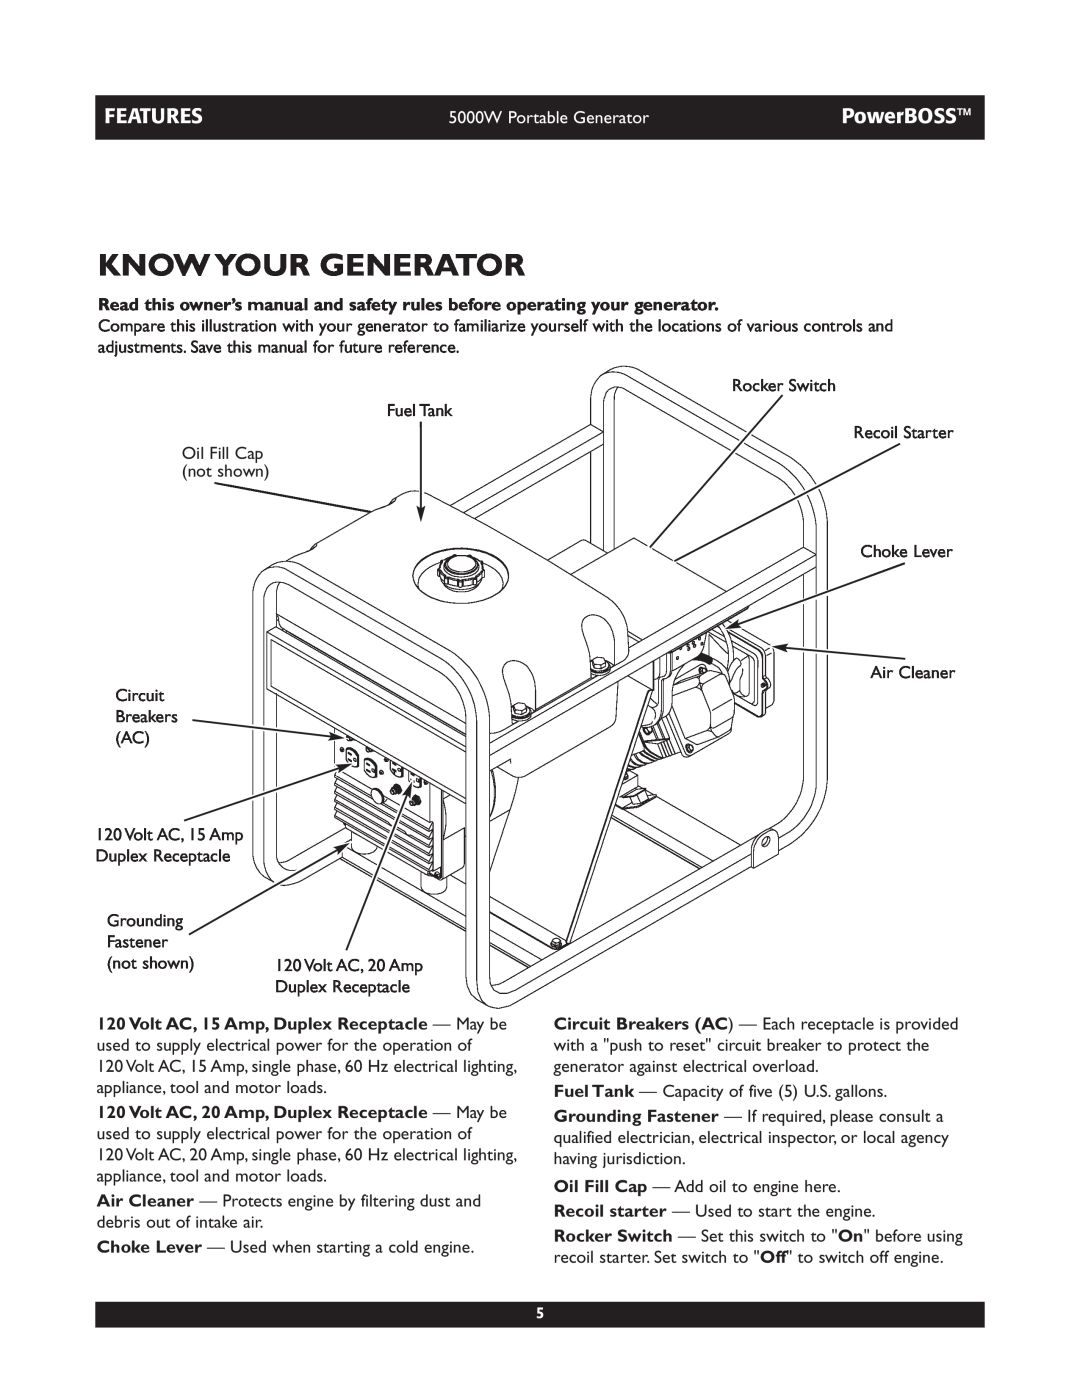 Briggs & Stratton 030222 owner manual Know Your Generator, Features, PowerBOSS, 5000W Portable Generator 